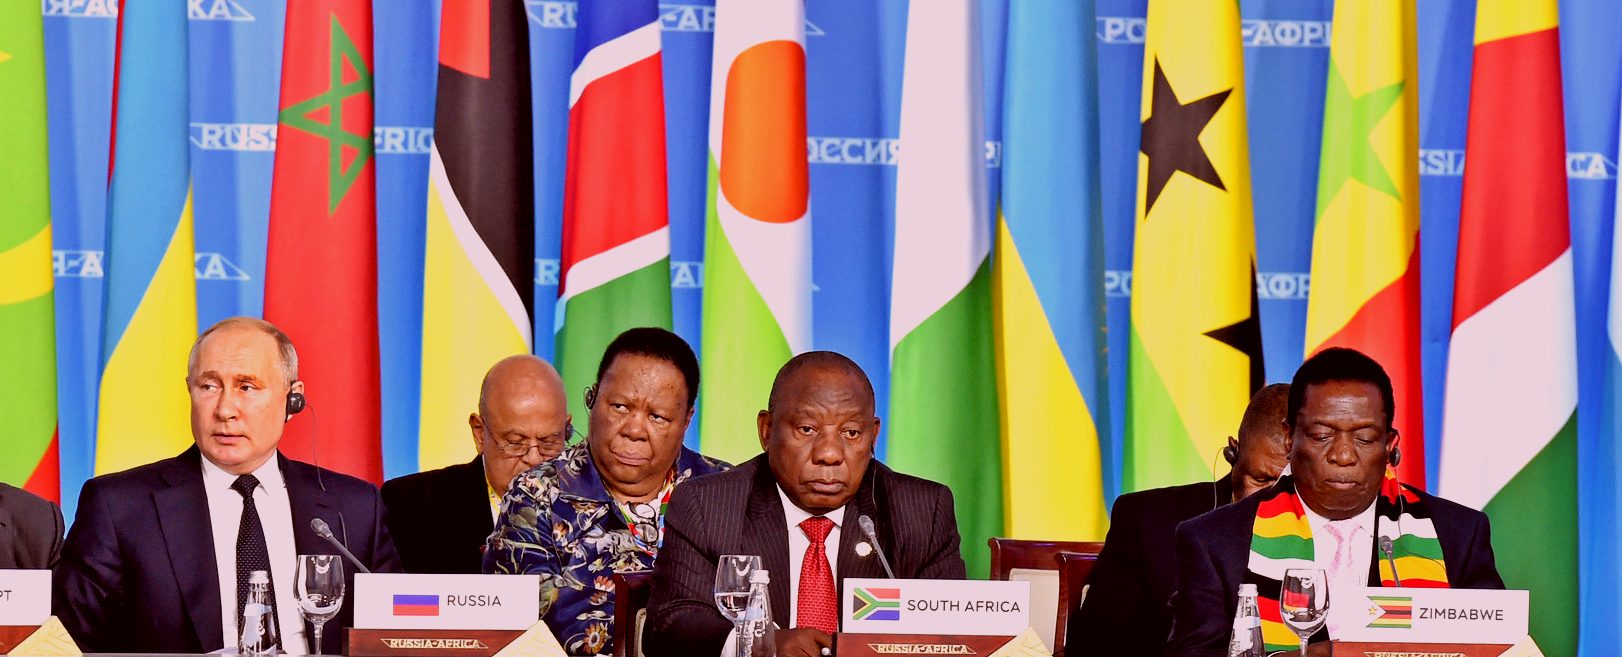 Vladimir Putin and African leaders at the 2019 Russia–Africa summit in Sochi, Russia.